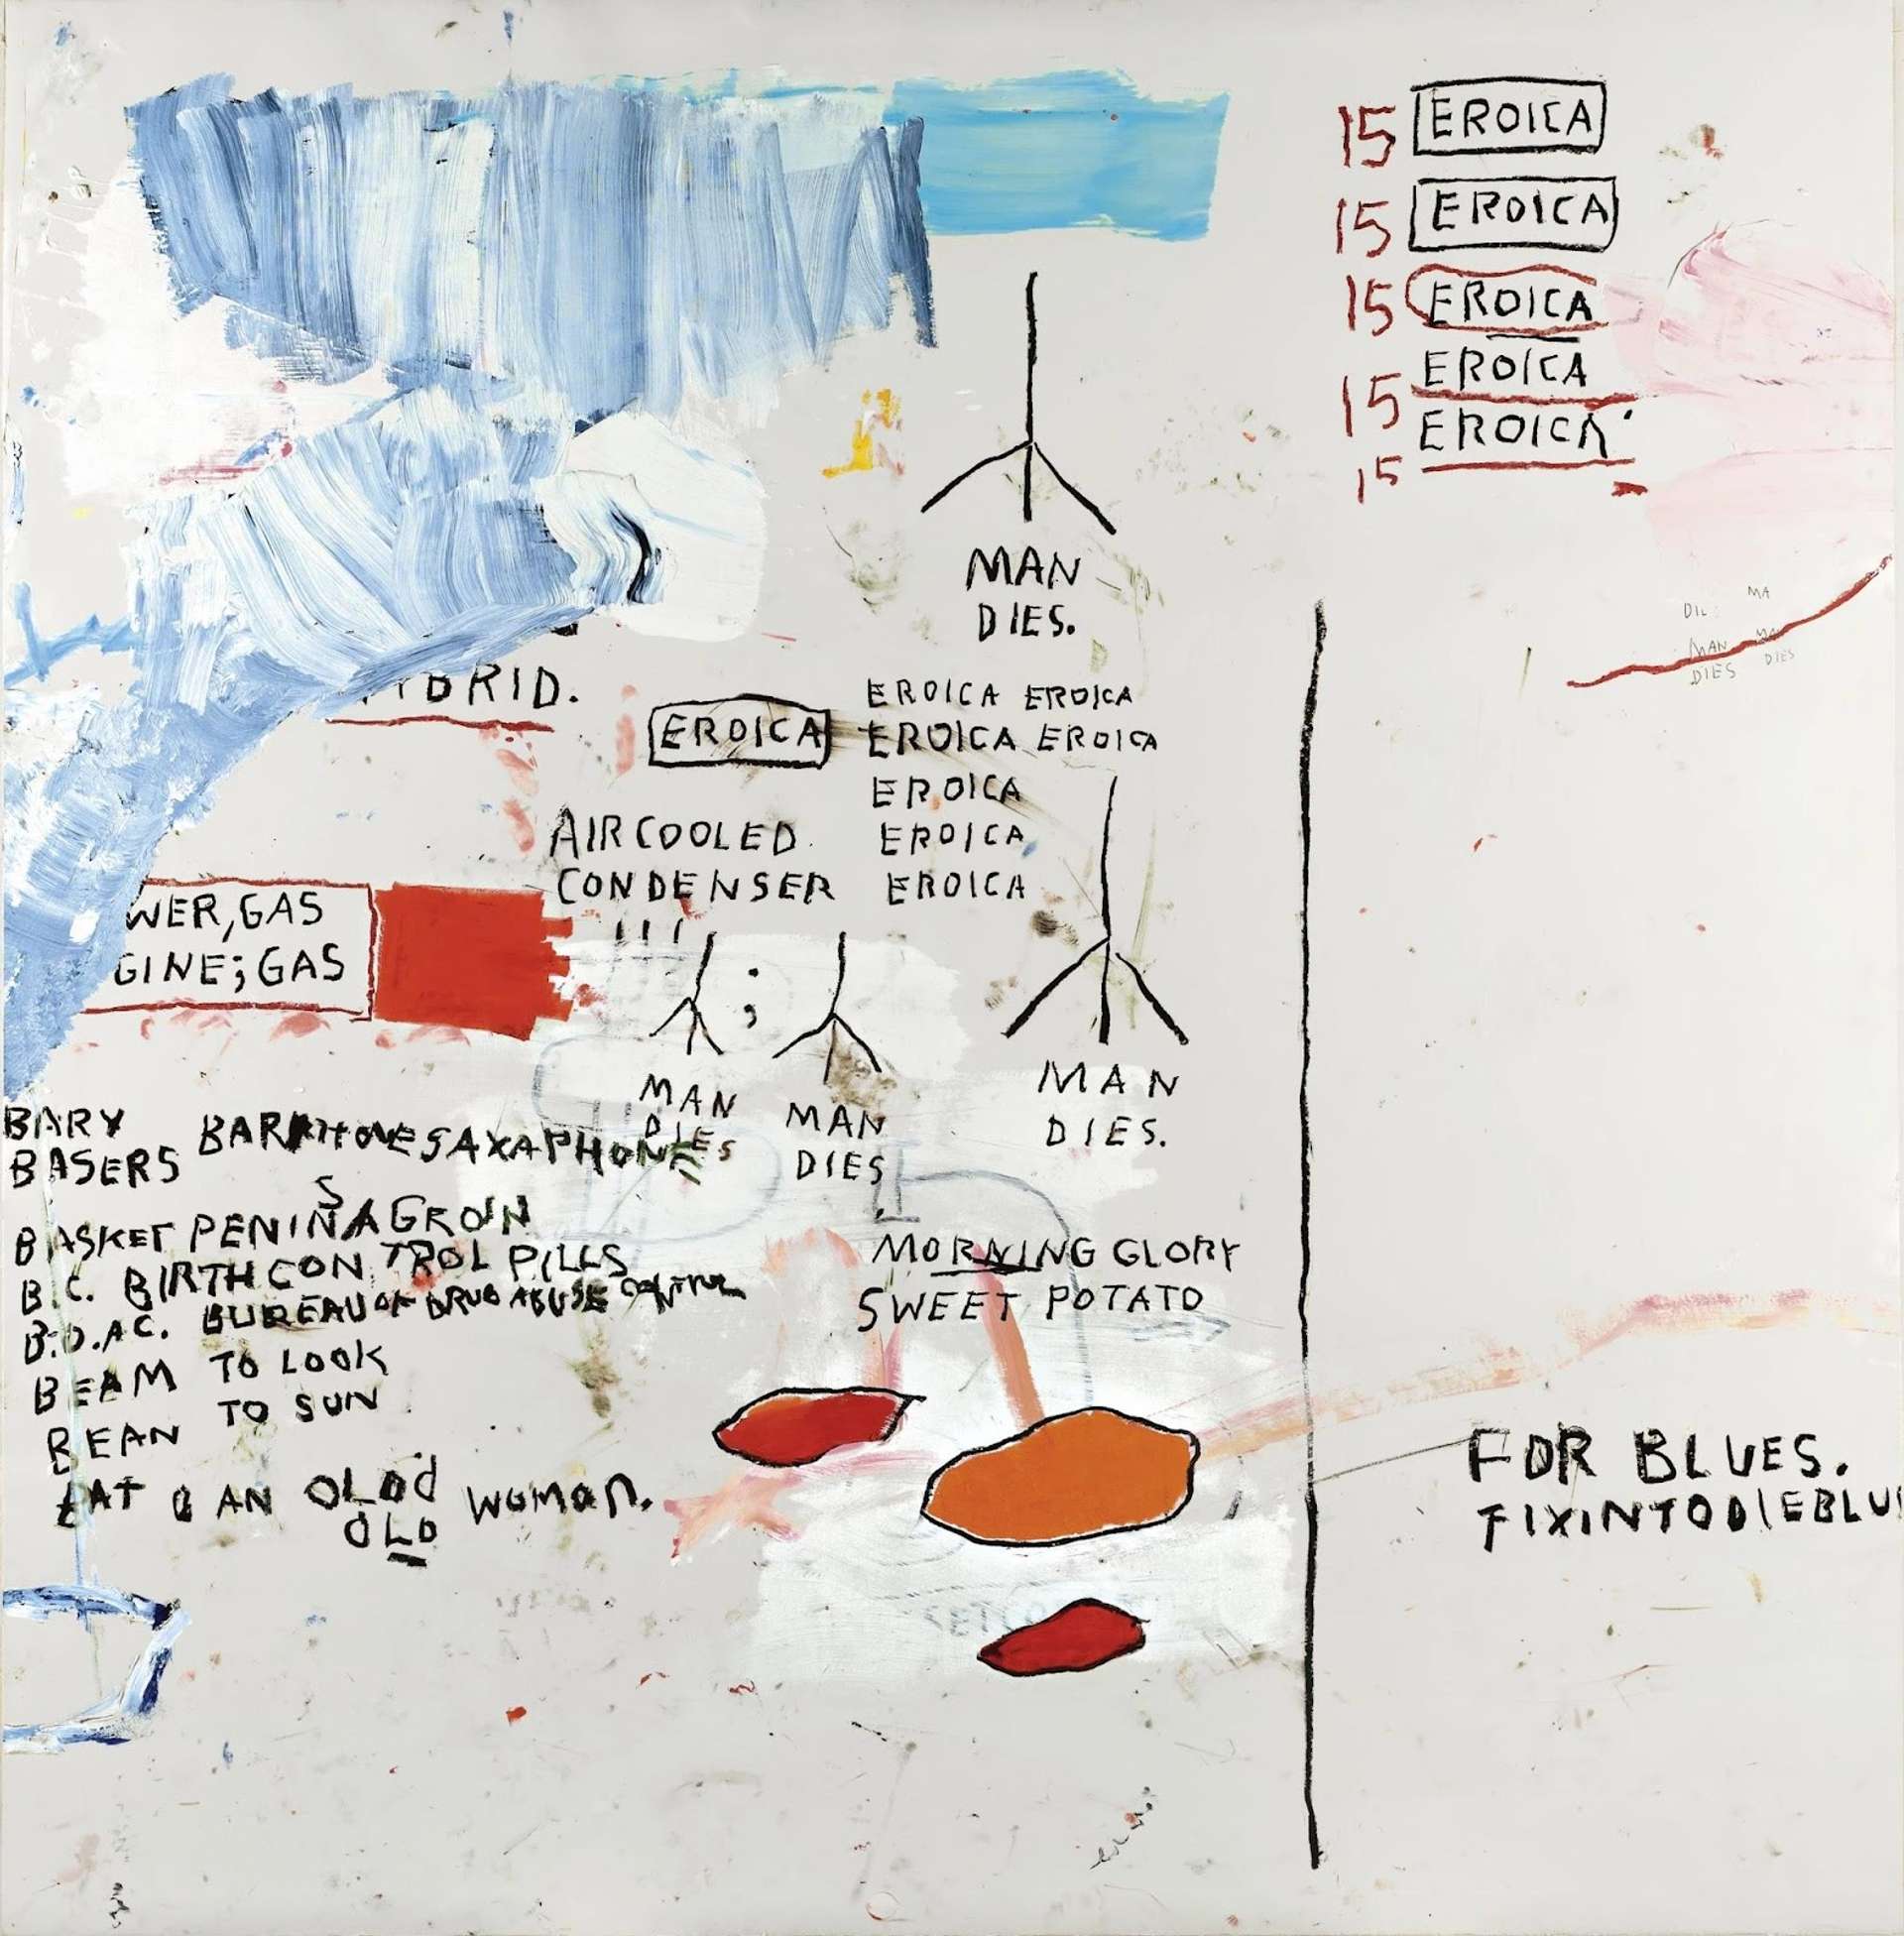 An image of the artwork Eroica I by Basquiat. It shows the artist’s signature texts, with a repeating “Eroica” being particularly prominent. Some sweet potatoes are also depicted, with the text “Morning Glory Sweet Potato” above them.